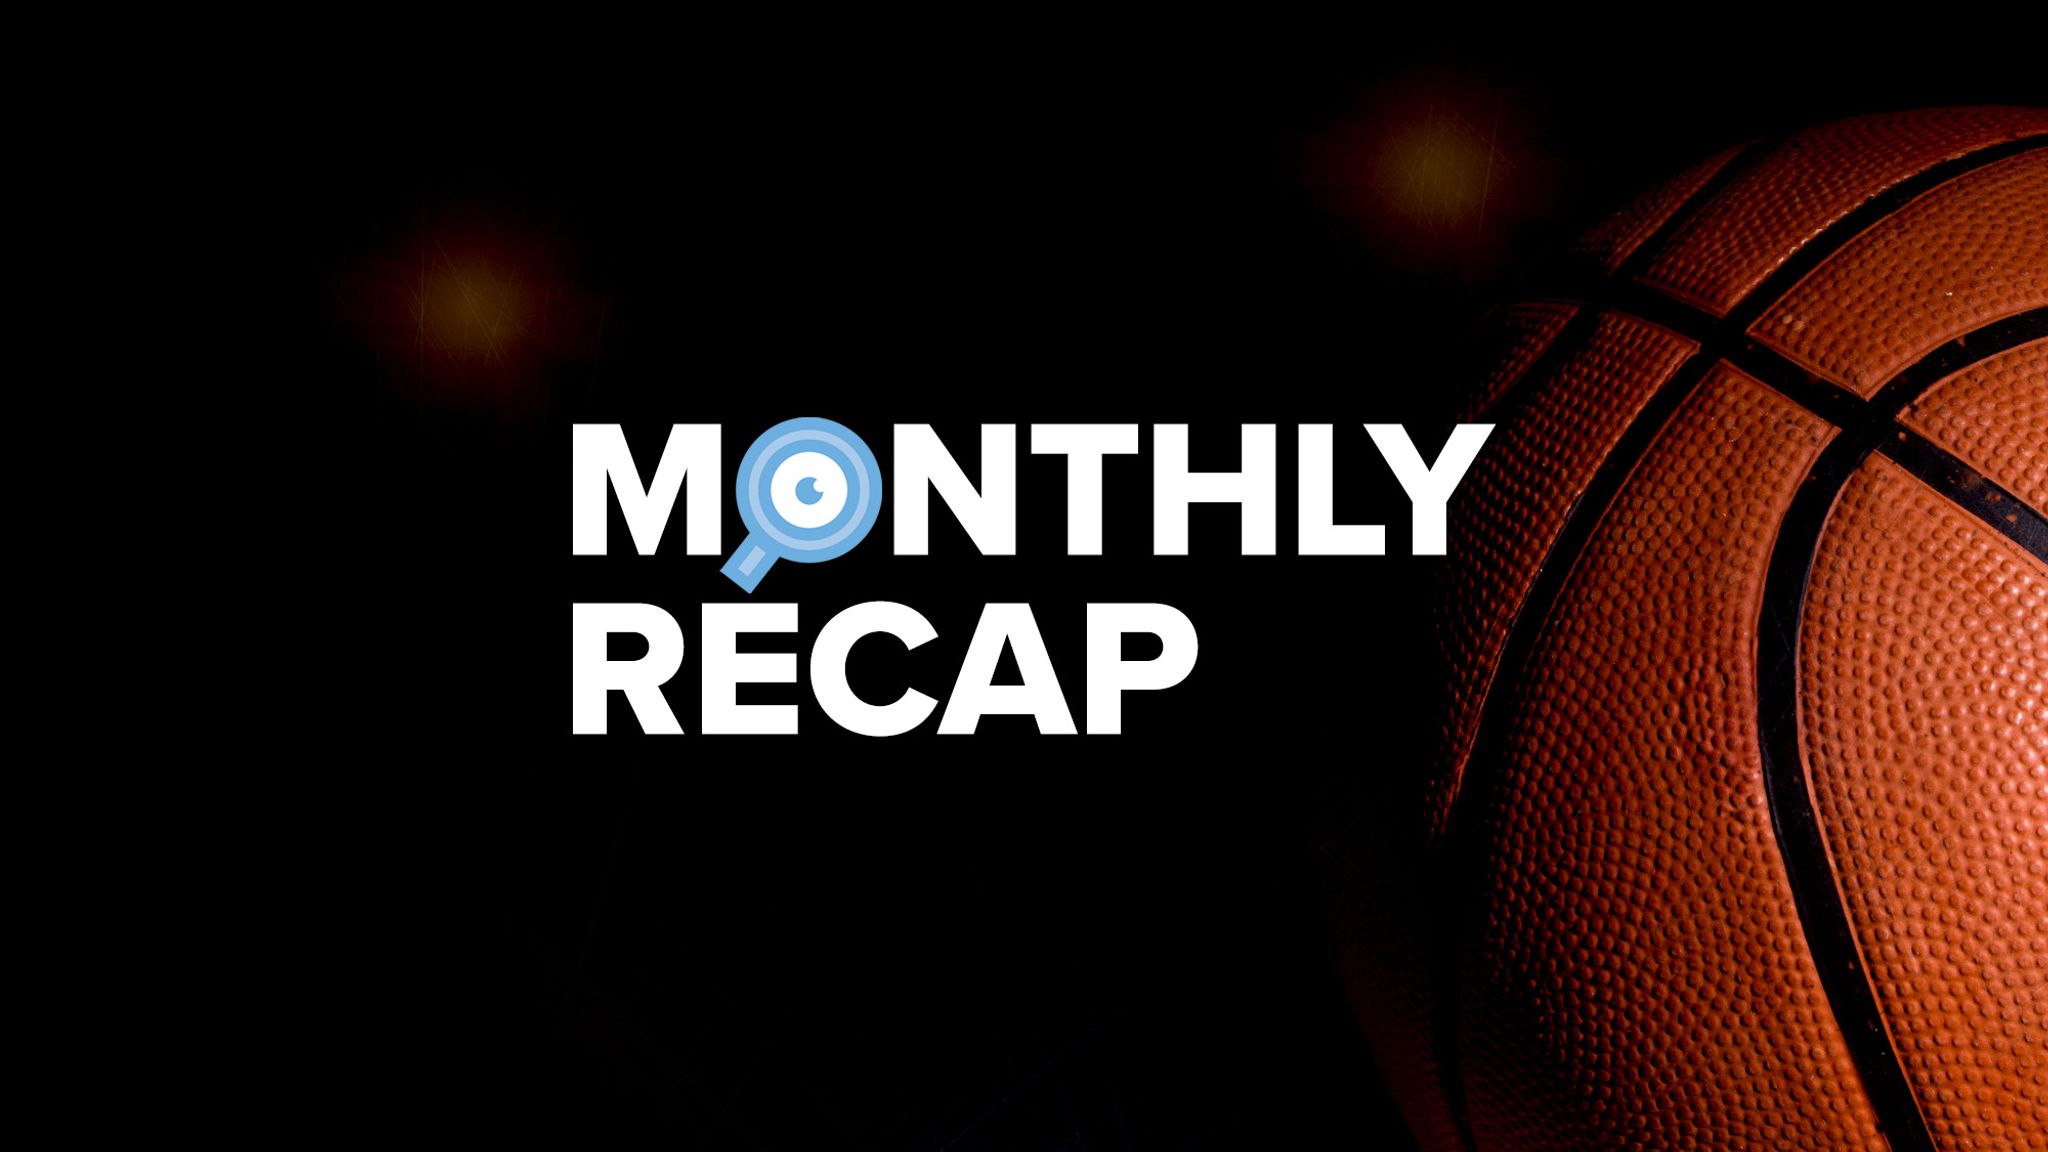 Featured image of CMS Critic Monthly Recap text against a dark background with a close-up of a basketball